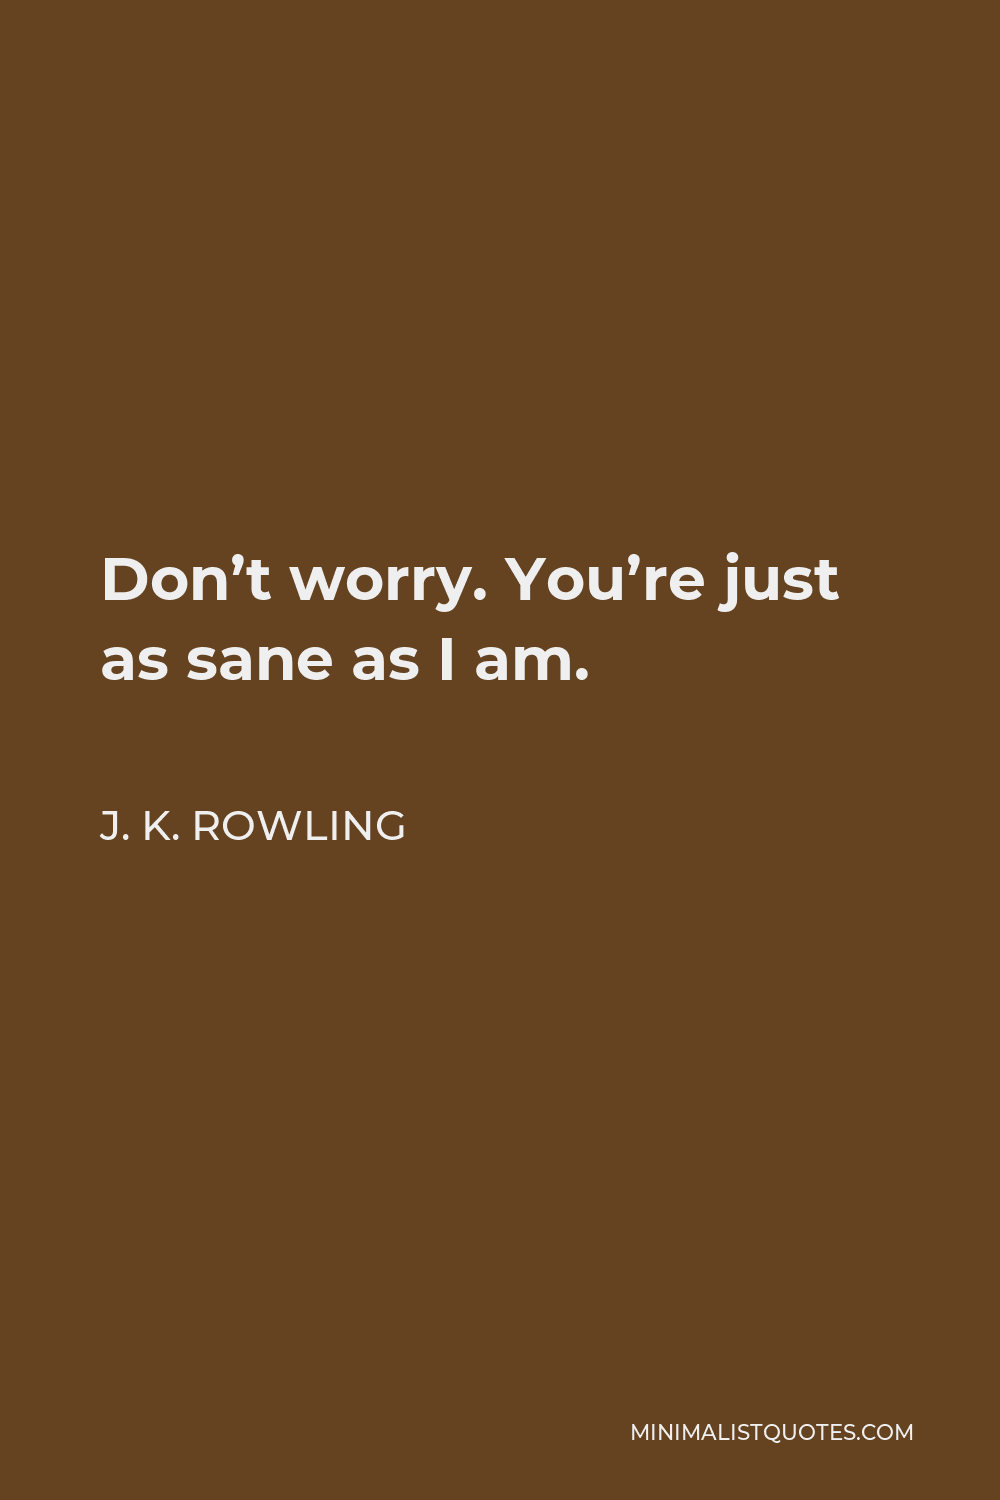 J. K. Rowling Quote - Don’t worry. You’re just as sane as I am.